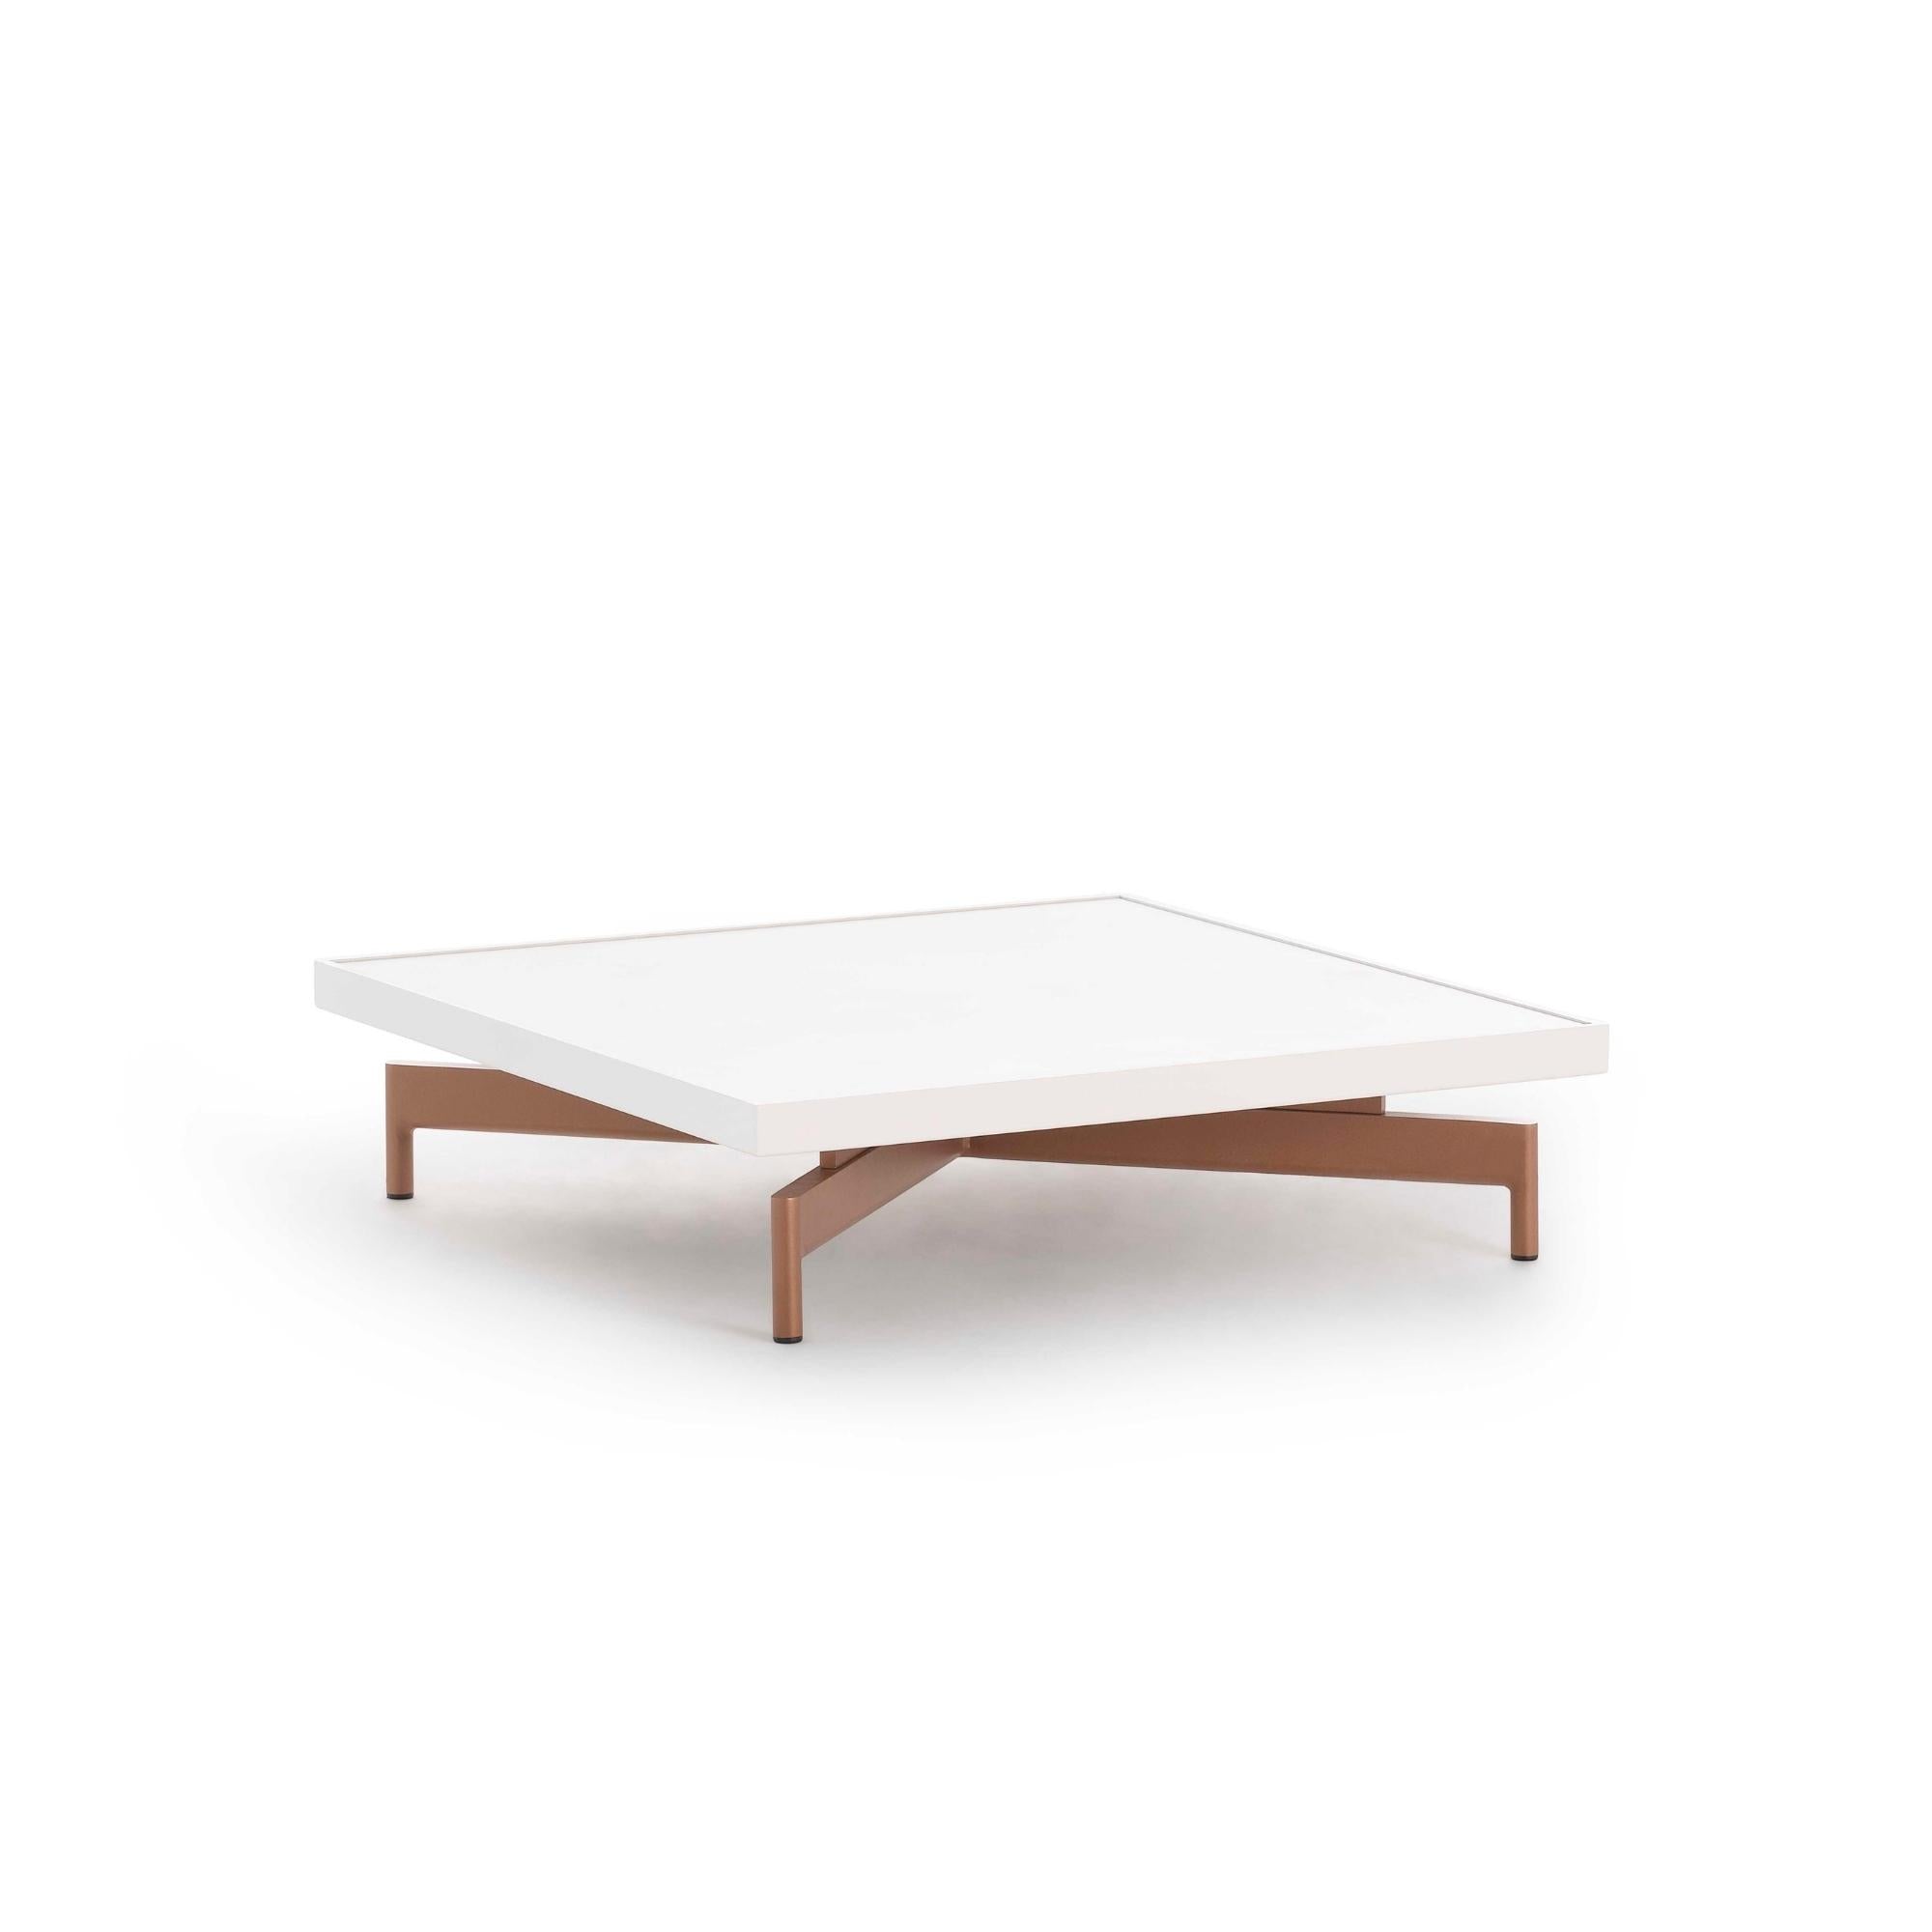 Onde Square Coffee Table - THAT COOL LIVING